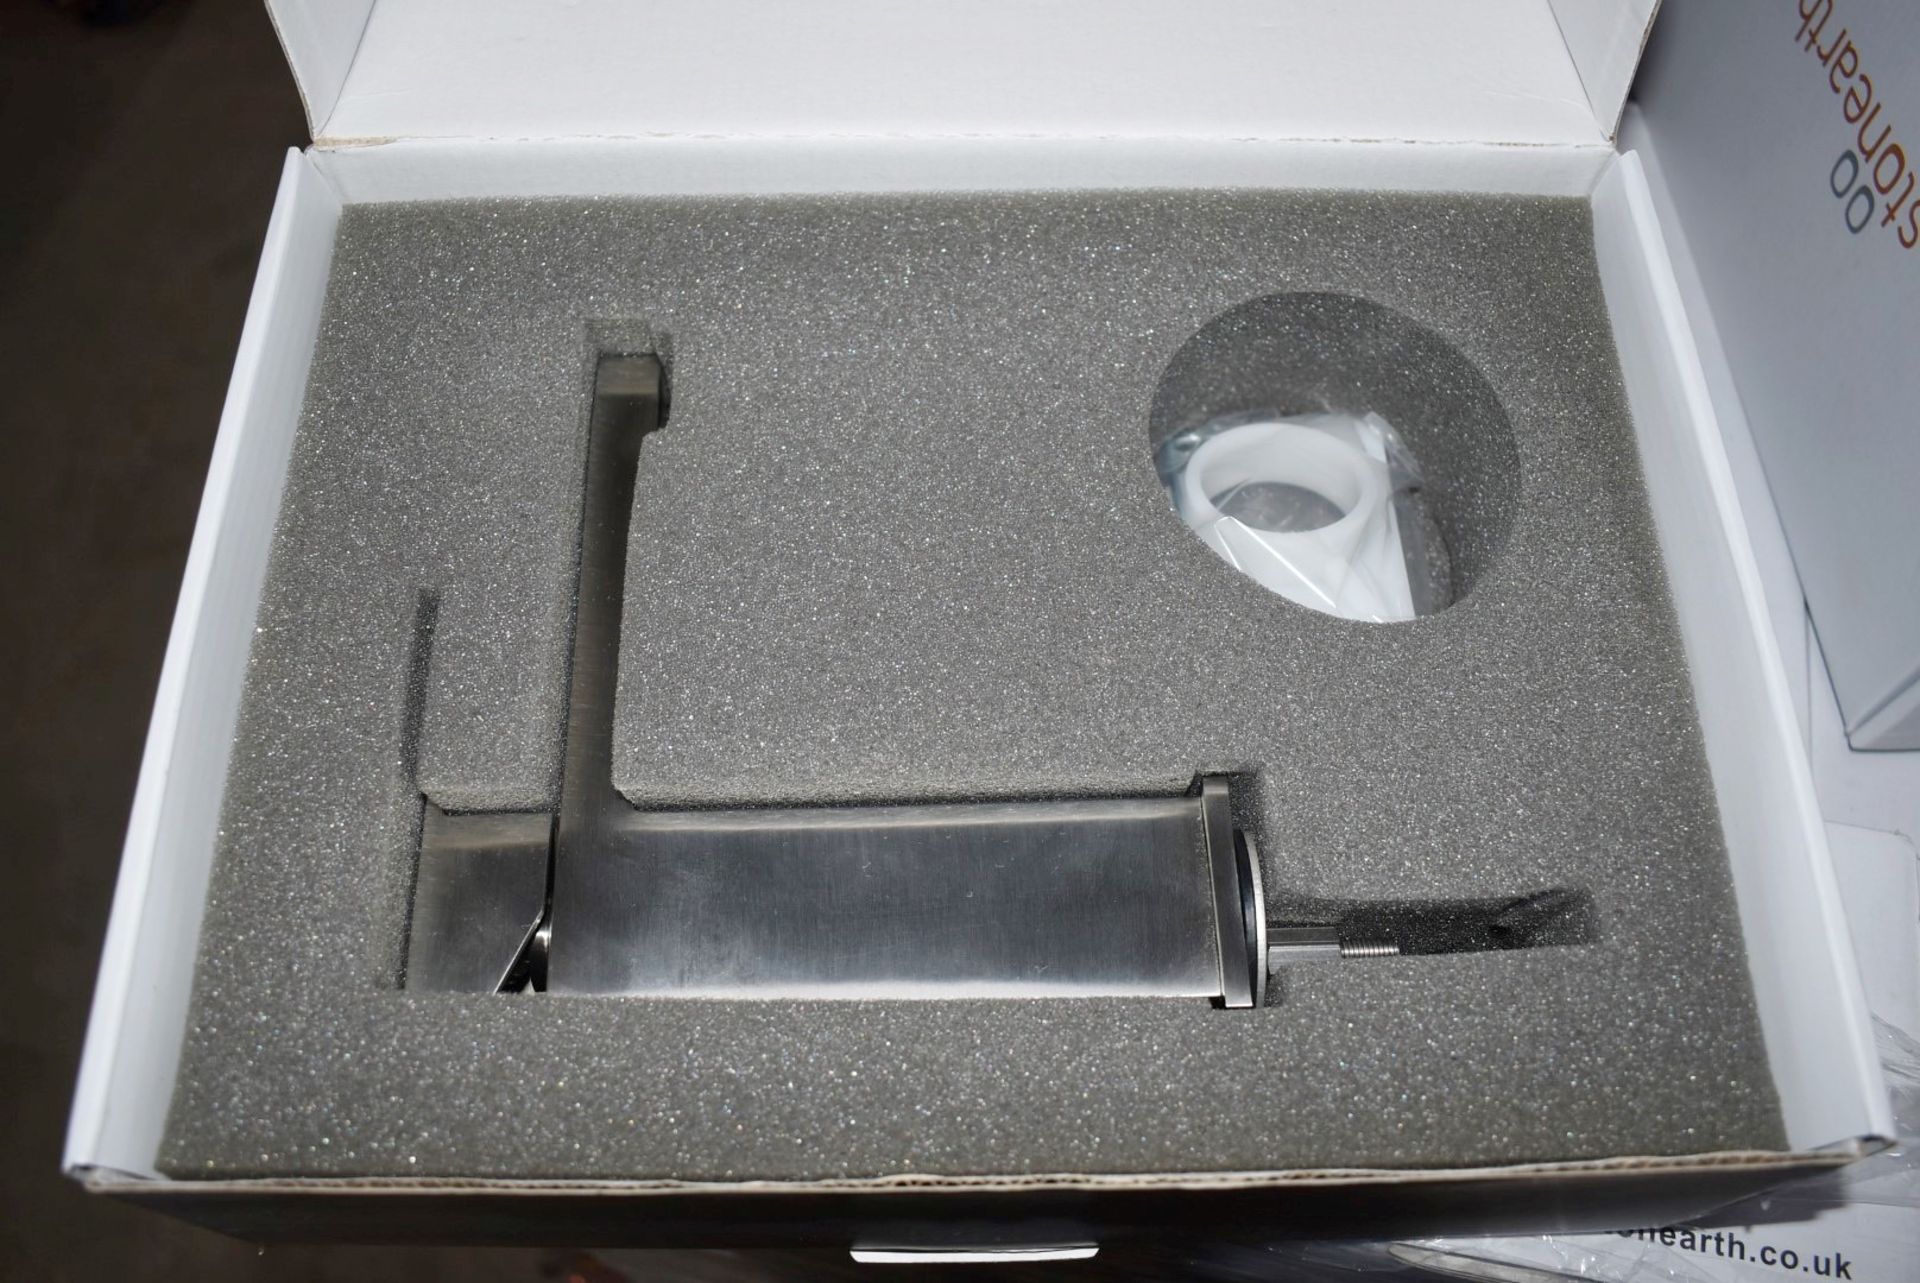 1 x Stonearth 'Metro' Stainless Steel Basin Mixer Tap - Brand New & Boxed - RRP £245 - Ref: TP821 P6 - Image 10 of 14